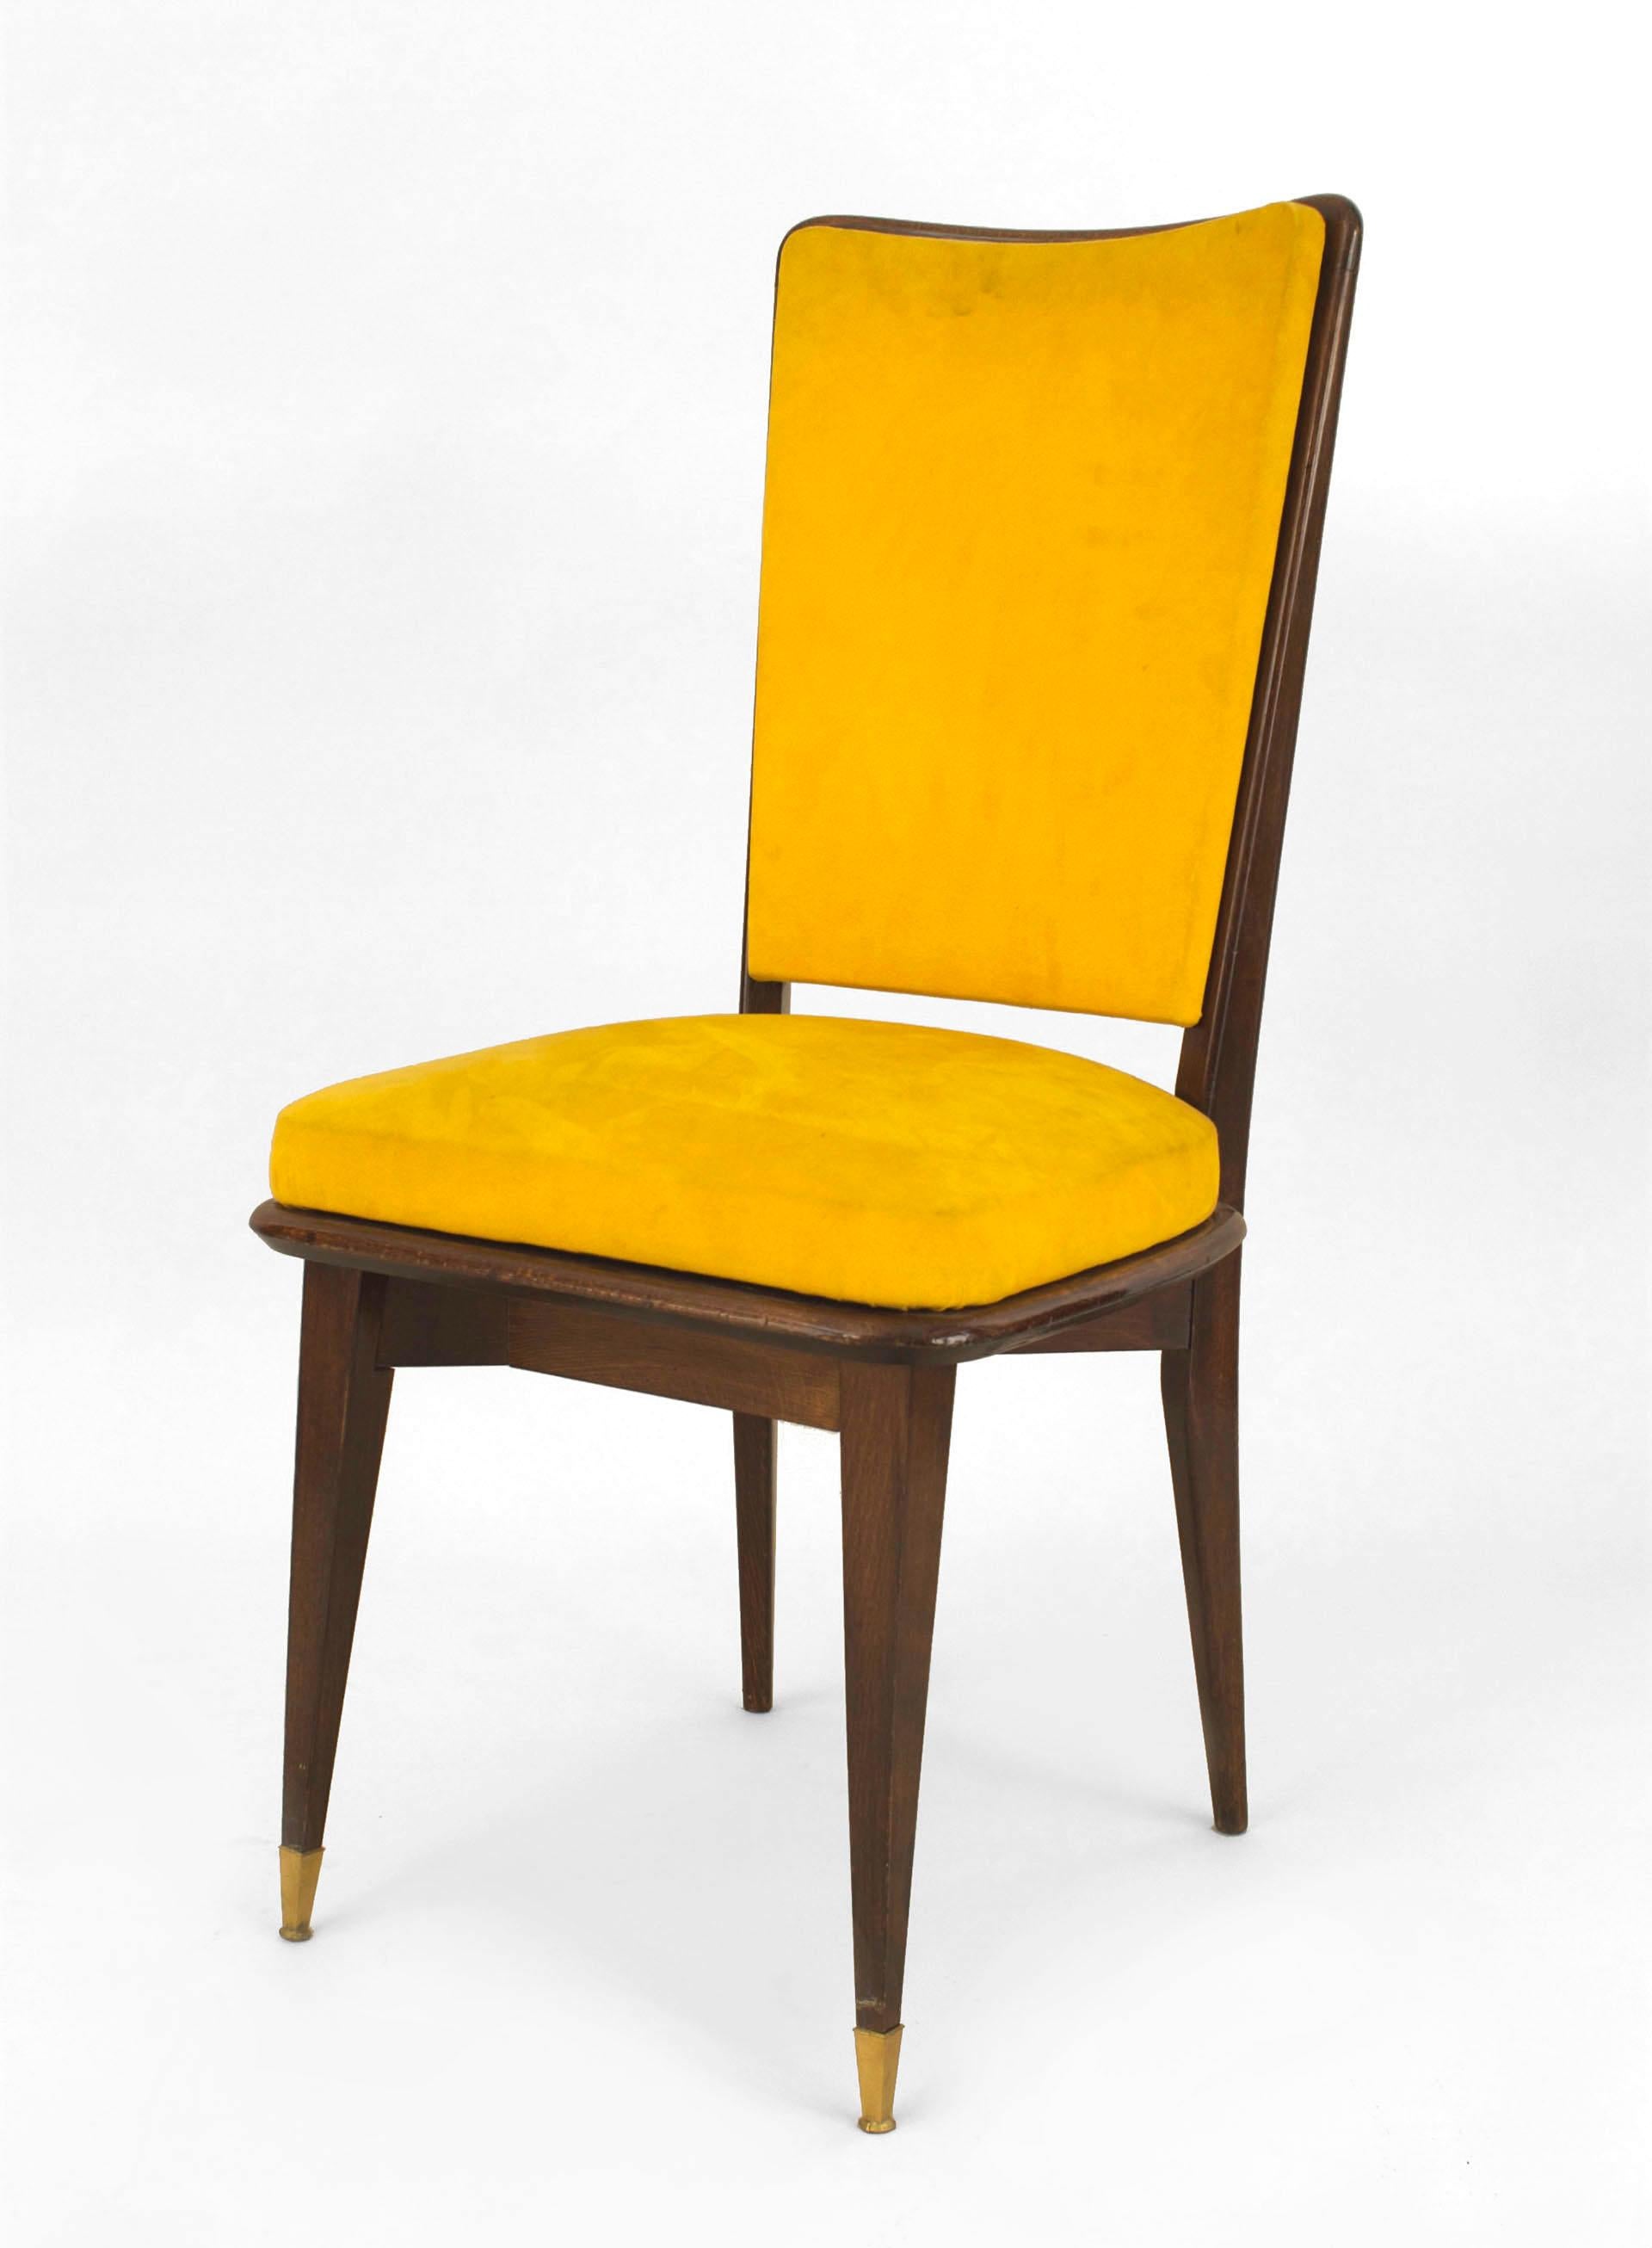 Set of six French, 1940s ebonized side chairs with a shaped yellow upholstered back and seat with bronze sabot feet (attributed to Jansen).

Maison Jansen was a Paris-based interior decoration office founded in 1880 by Dutch-born Jean-Henri Jansen.